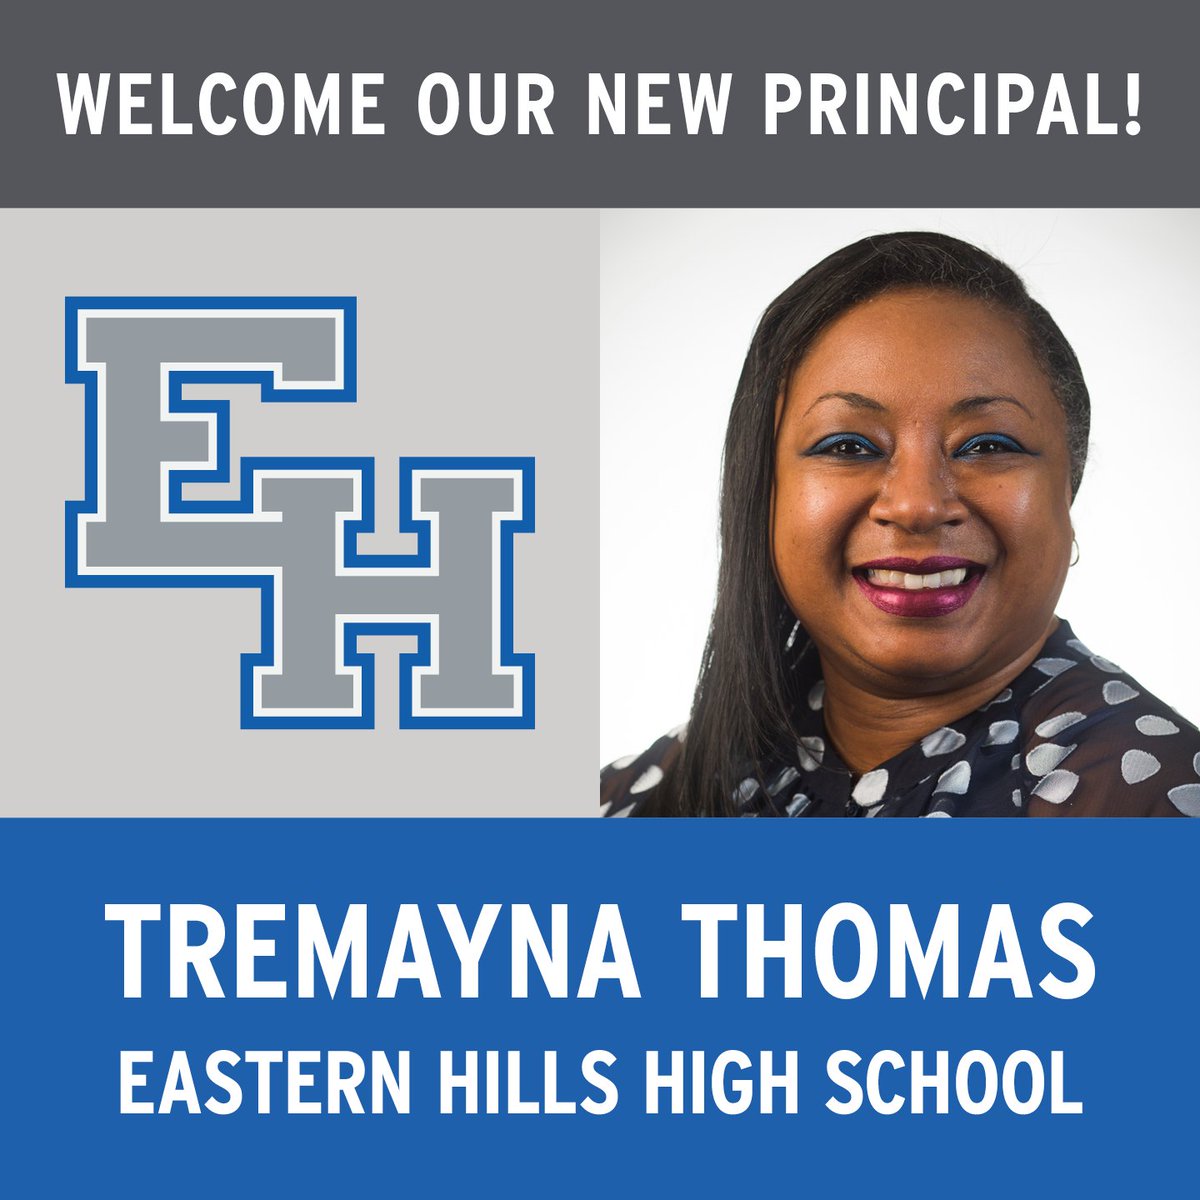 Fort Worth ISD is excited to announce a new principal at Eastern Hills High School. We’re looking forward to a strong finish to the school year!